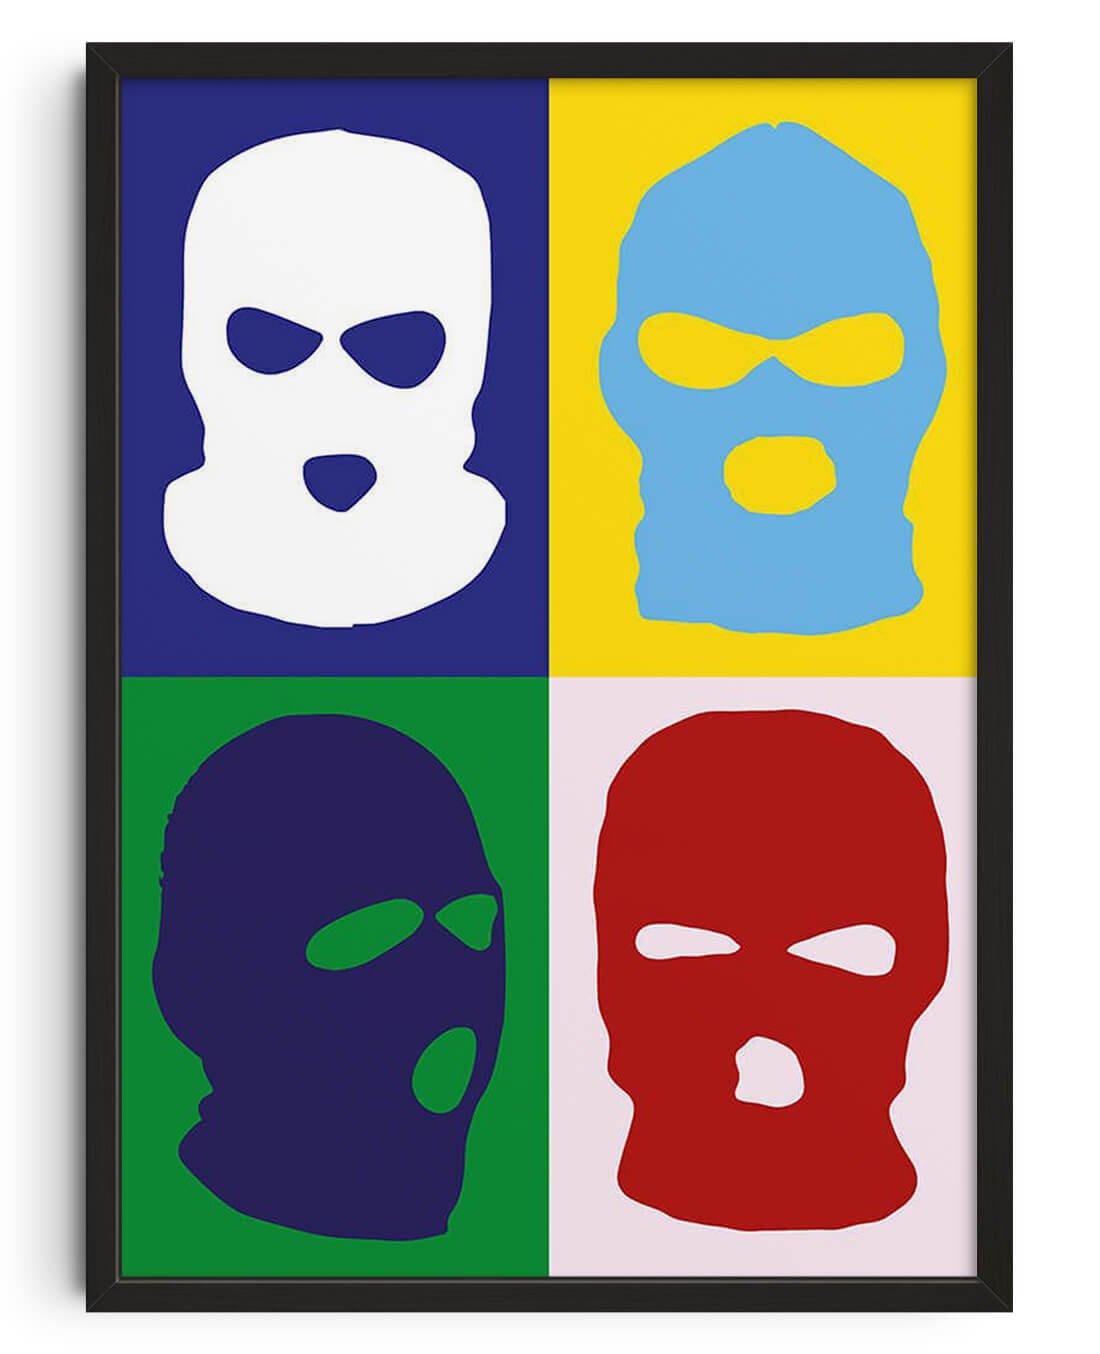 Balaclava contemporary wall art print by Max Blackmore - sold by DROOL